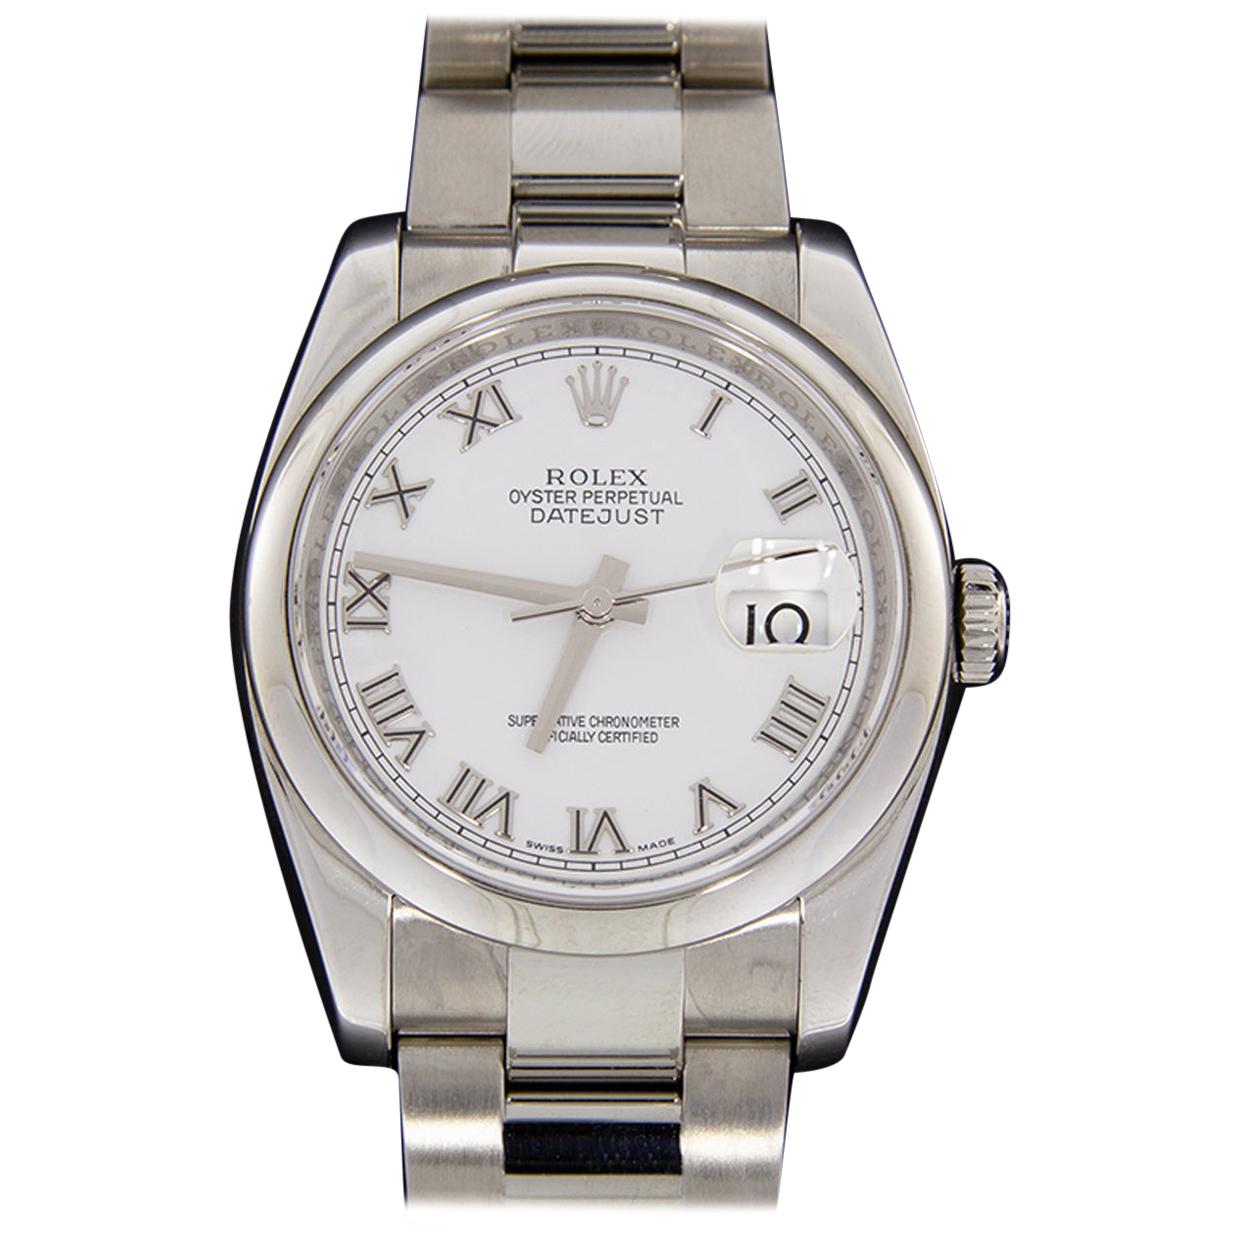 Rolex Oyster Datejust Stainless Steel Watch with White Dial, Model 116200